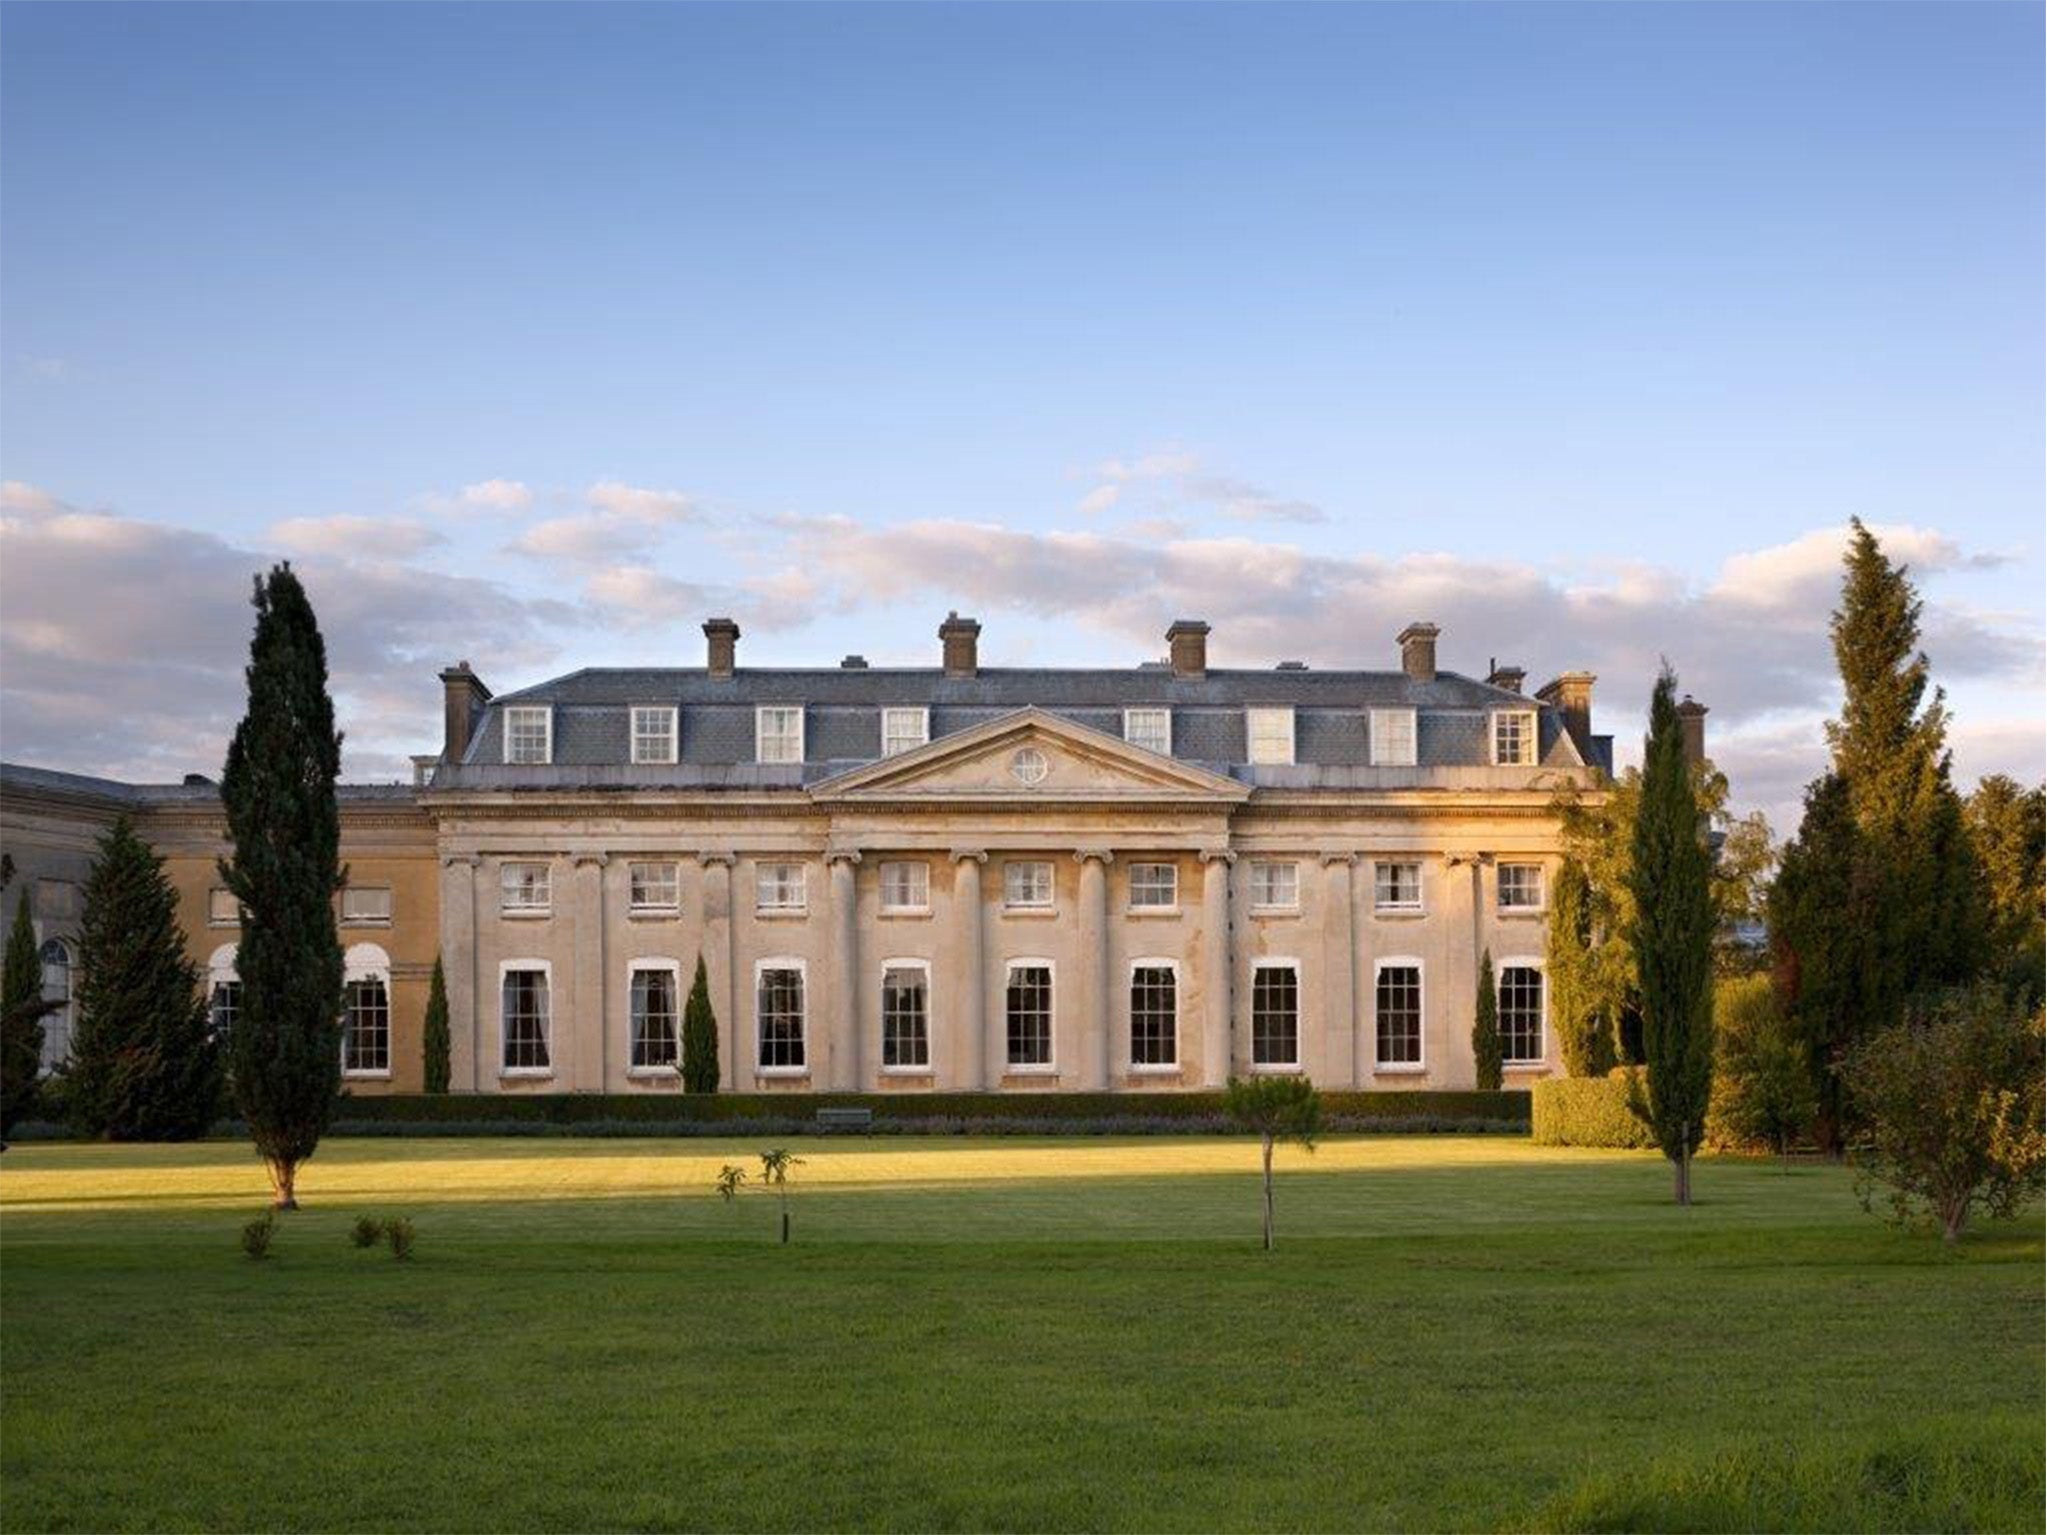 Opportunities for walking and cycling stand out during a stay at the Ickworth Hotel